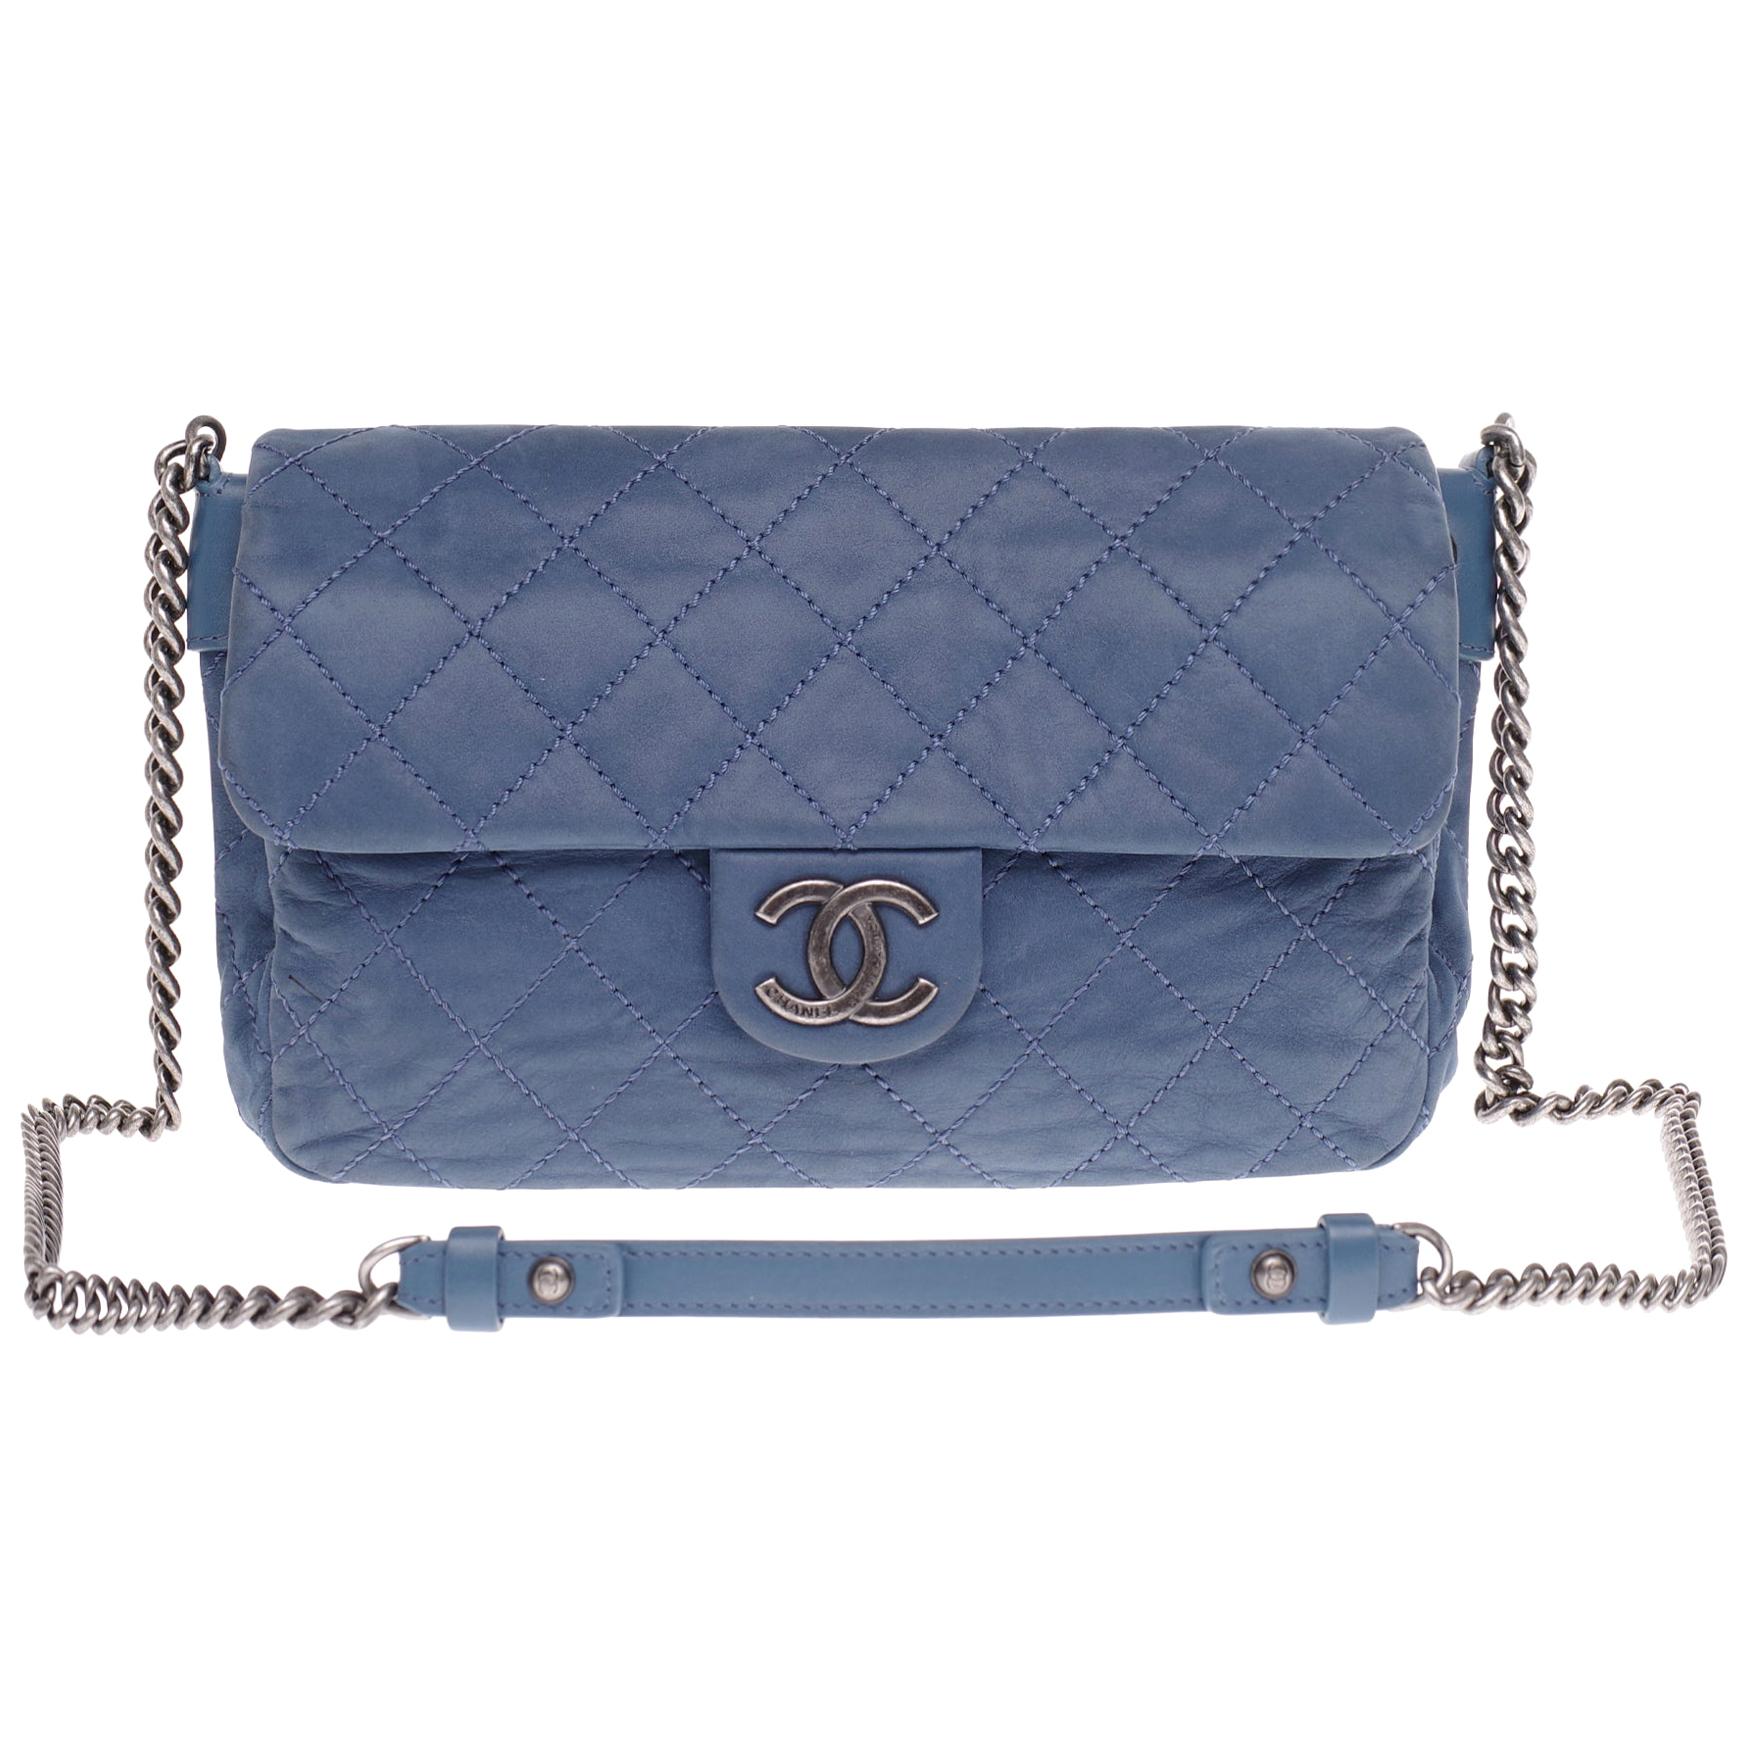 Chanel Classic shoulder bag in blue quilted leather and silver hardware